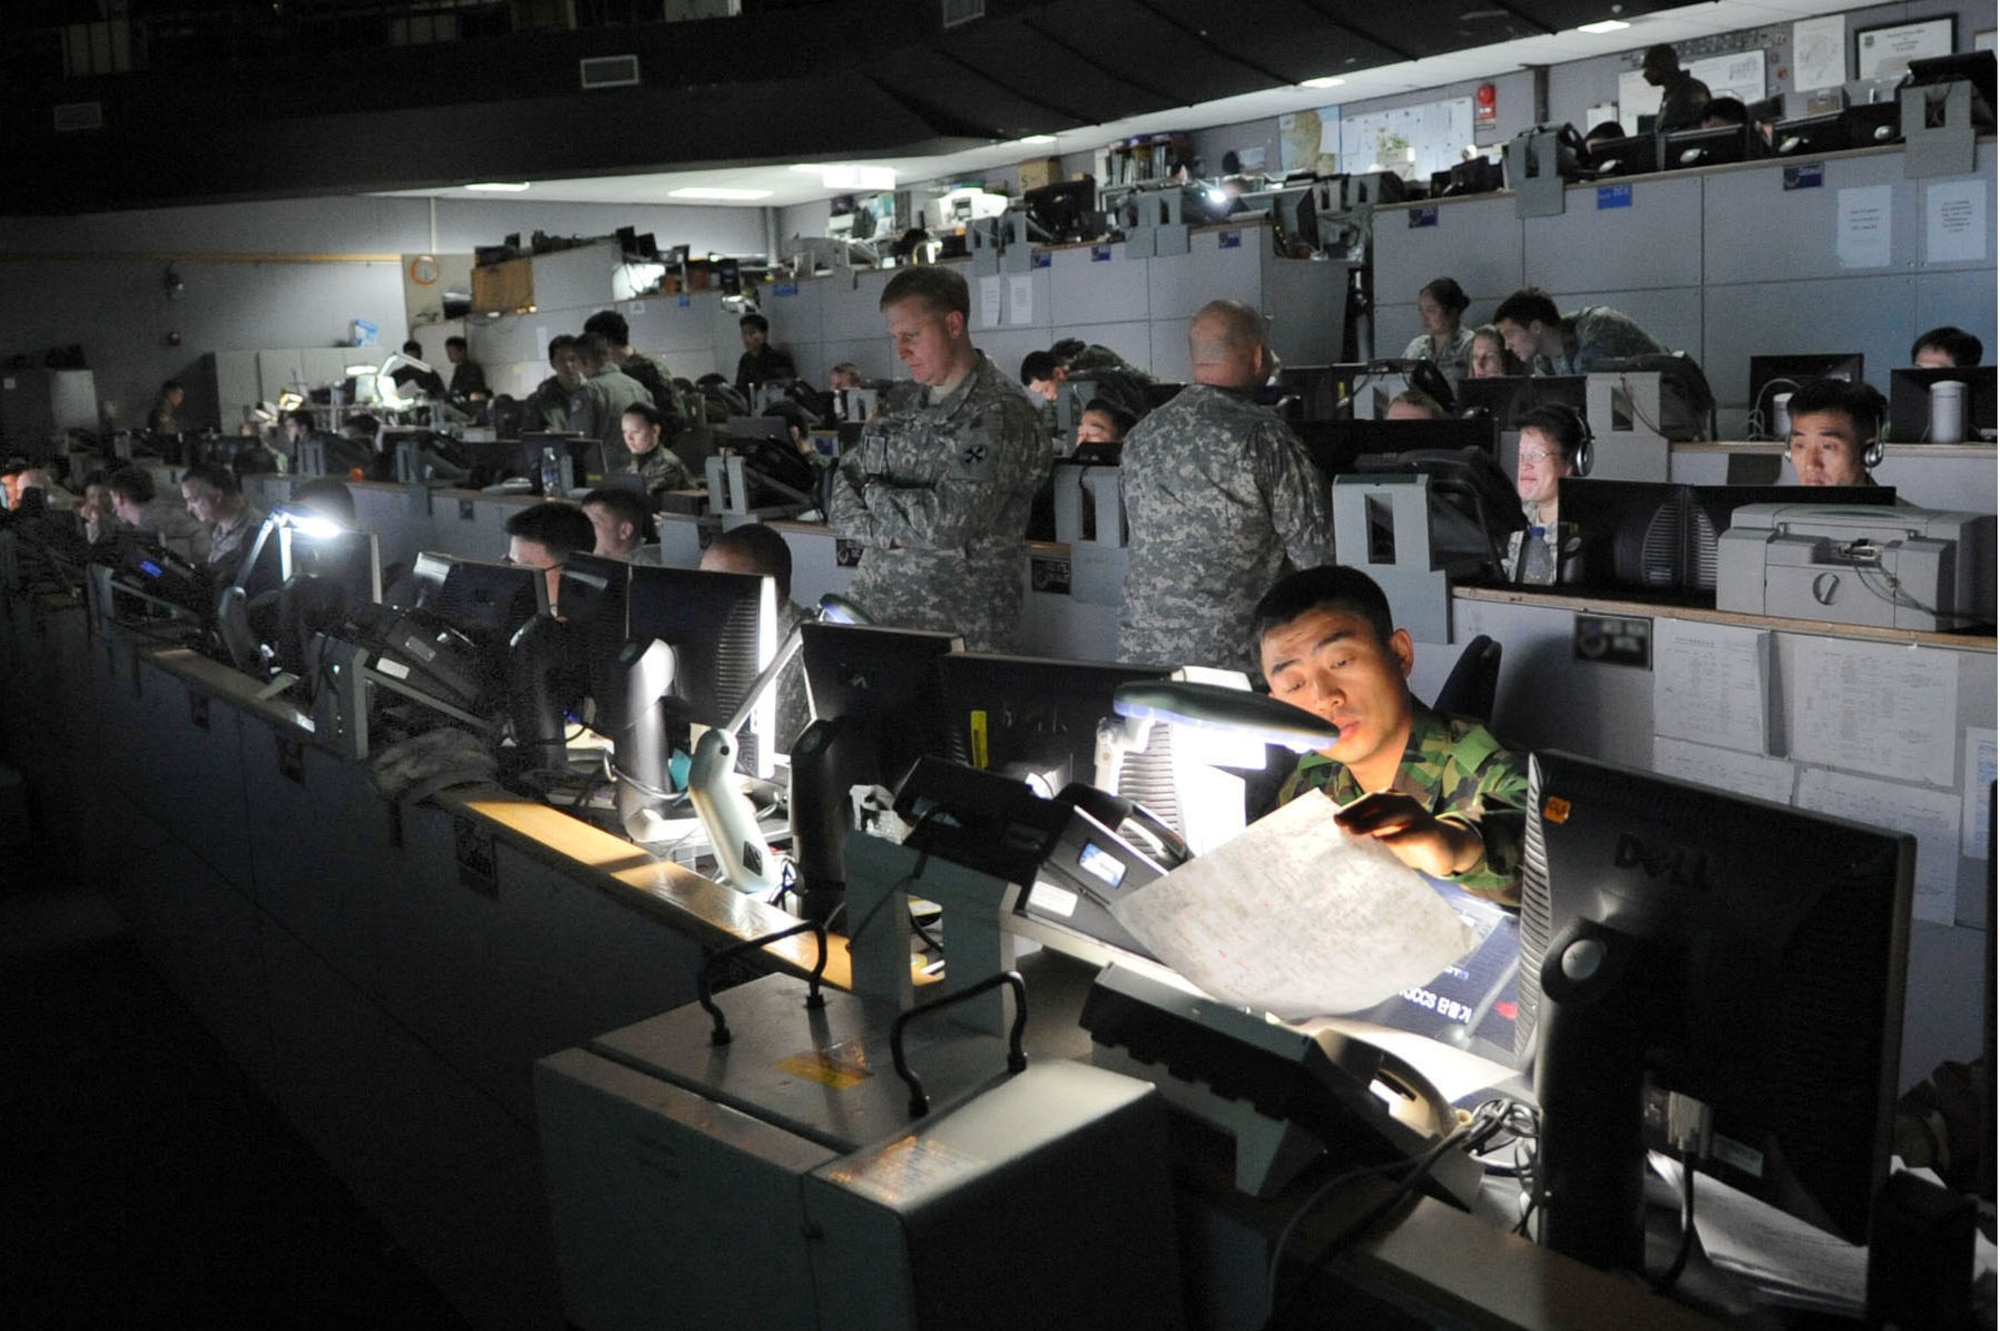 American and Korean servicemembers conduct operations at the Korea Air Operations Center at Osan Air Base, South Korea, during an exercise earlier this year. More than 27,000 American and 500,000 South Korean servicemembers currently are participating in Exercise Ulchi Freedom Guardian which runs from Aug. 16 to Aug. 26, 2010. This year marks the 34th anniversary of the joint/combined exercise. (U.S. Air Force photo illustration)